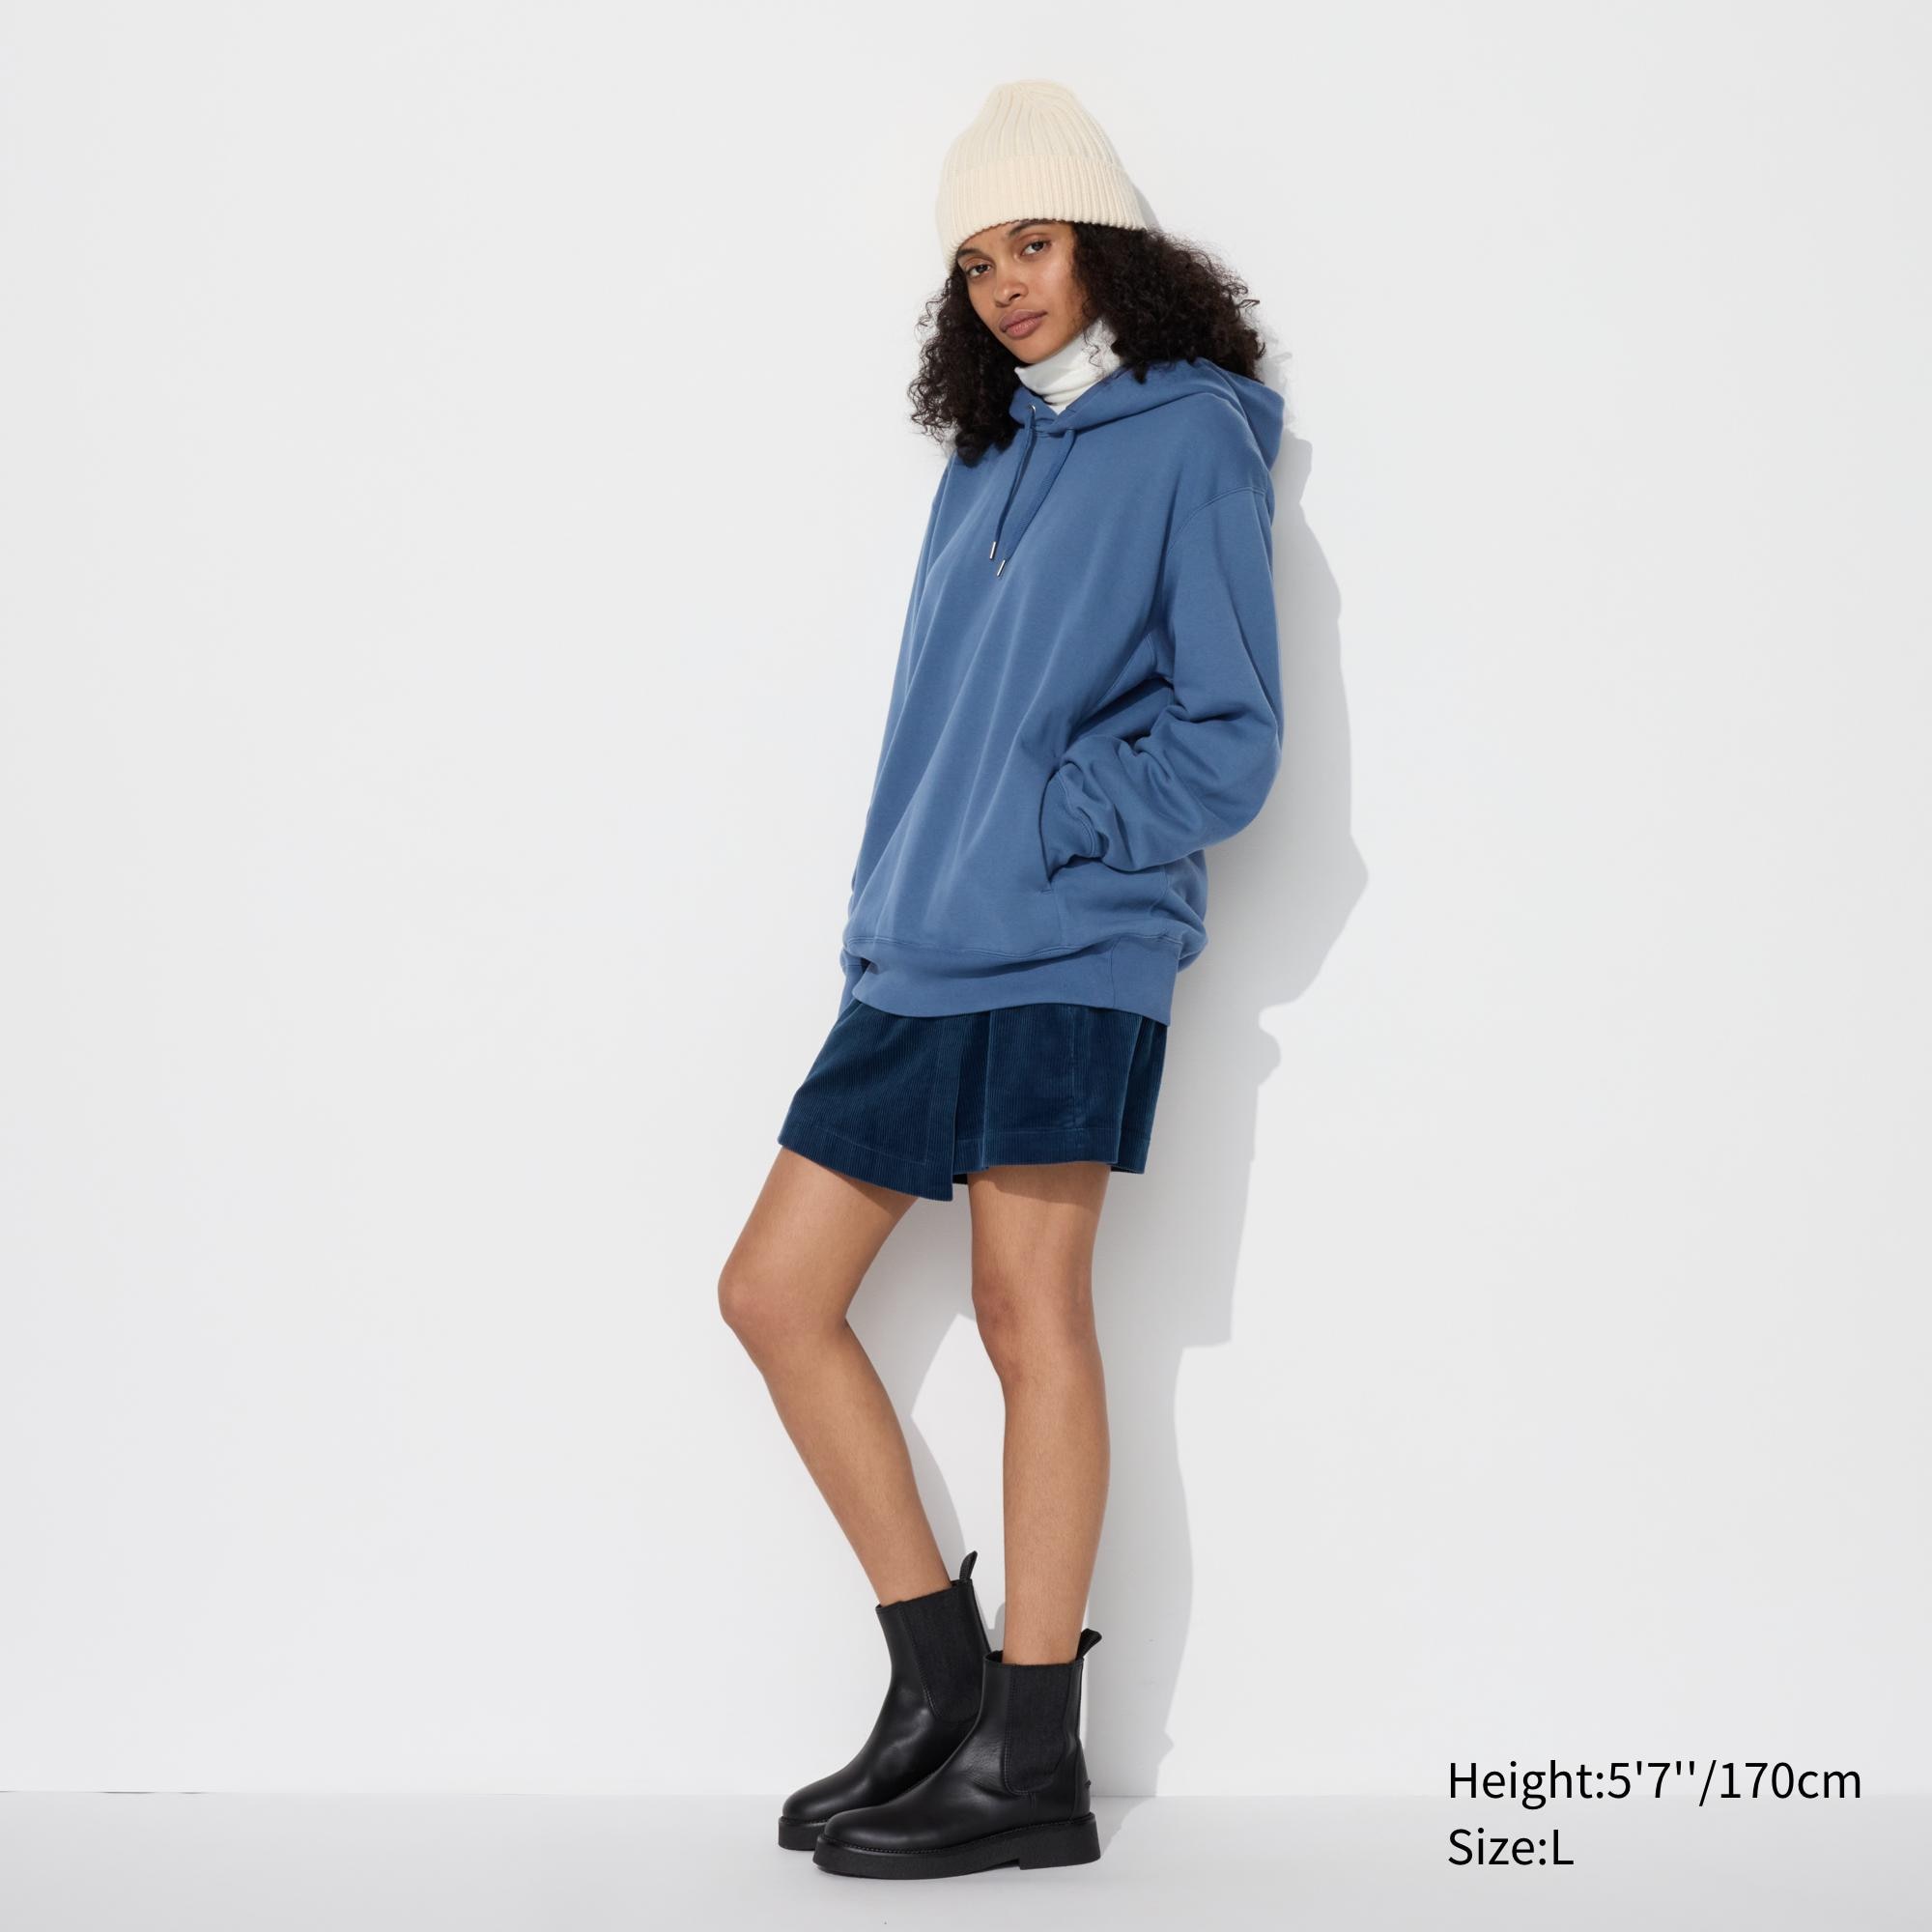 SWEAT PULLOVER HOODIE COORD  UNIQLO SG